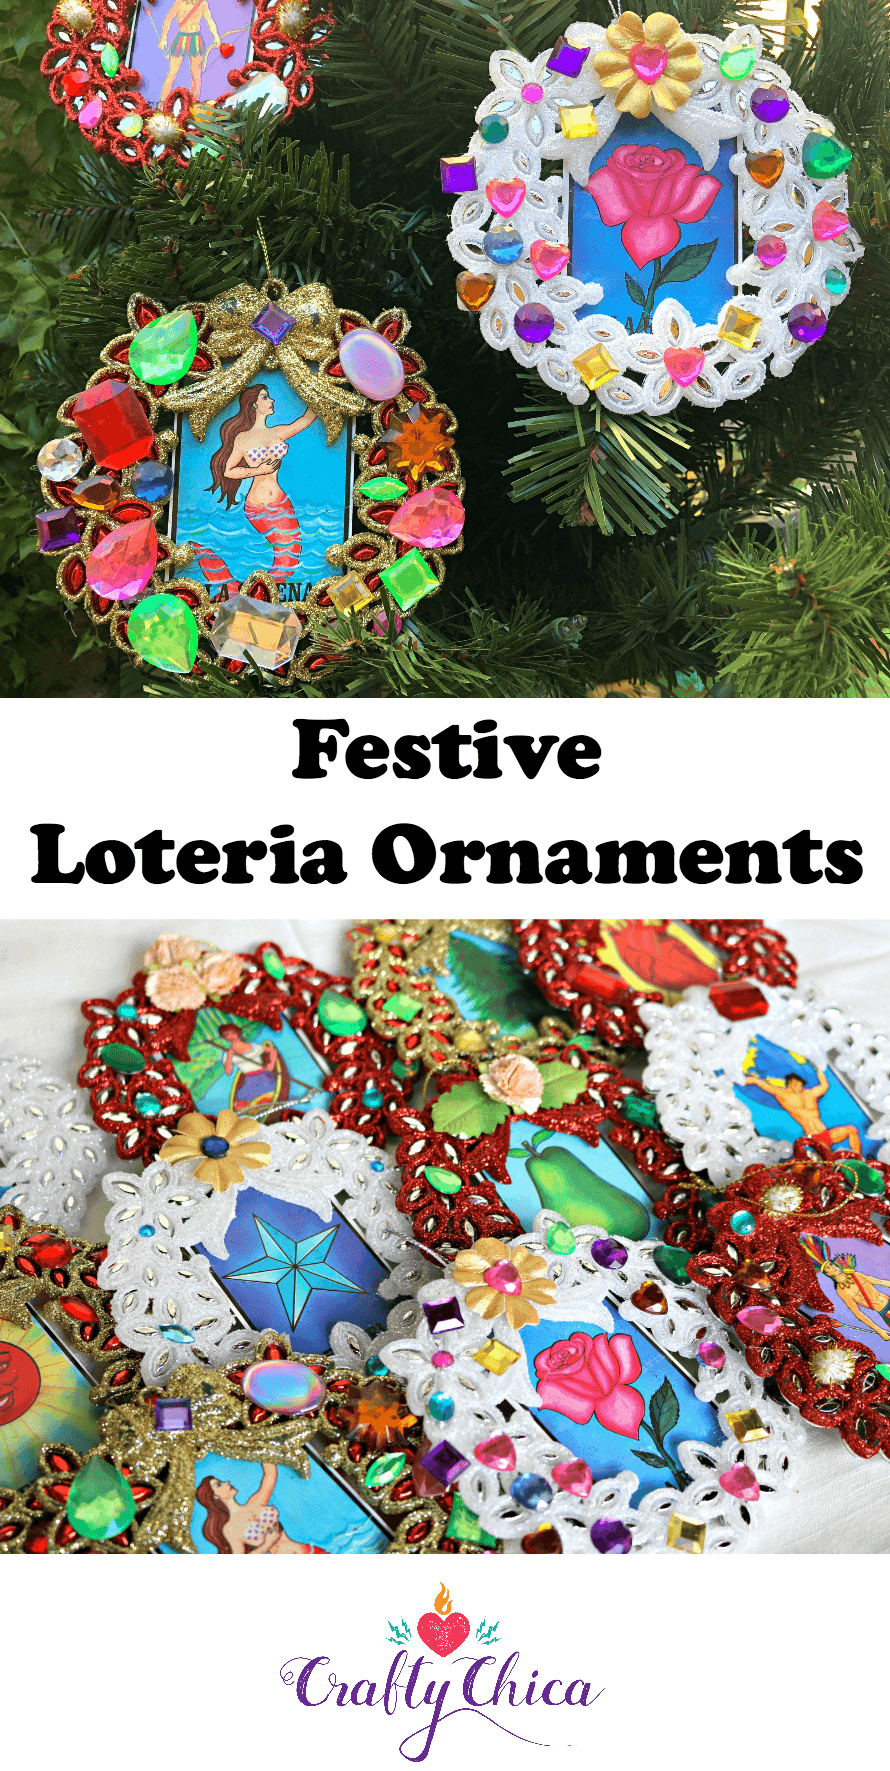 Loteria ornaments by CraftyChica.com